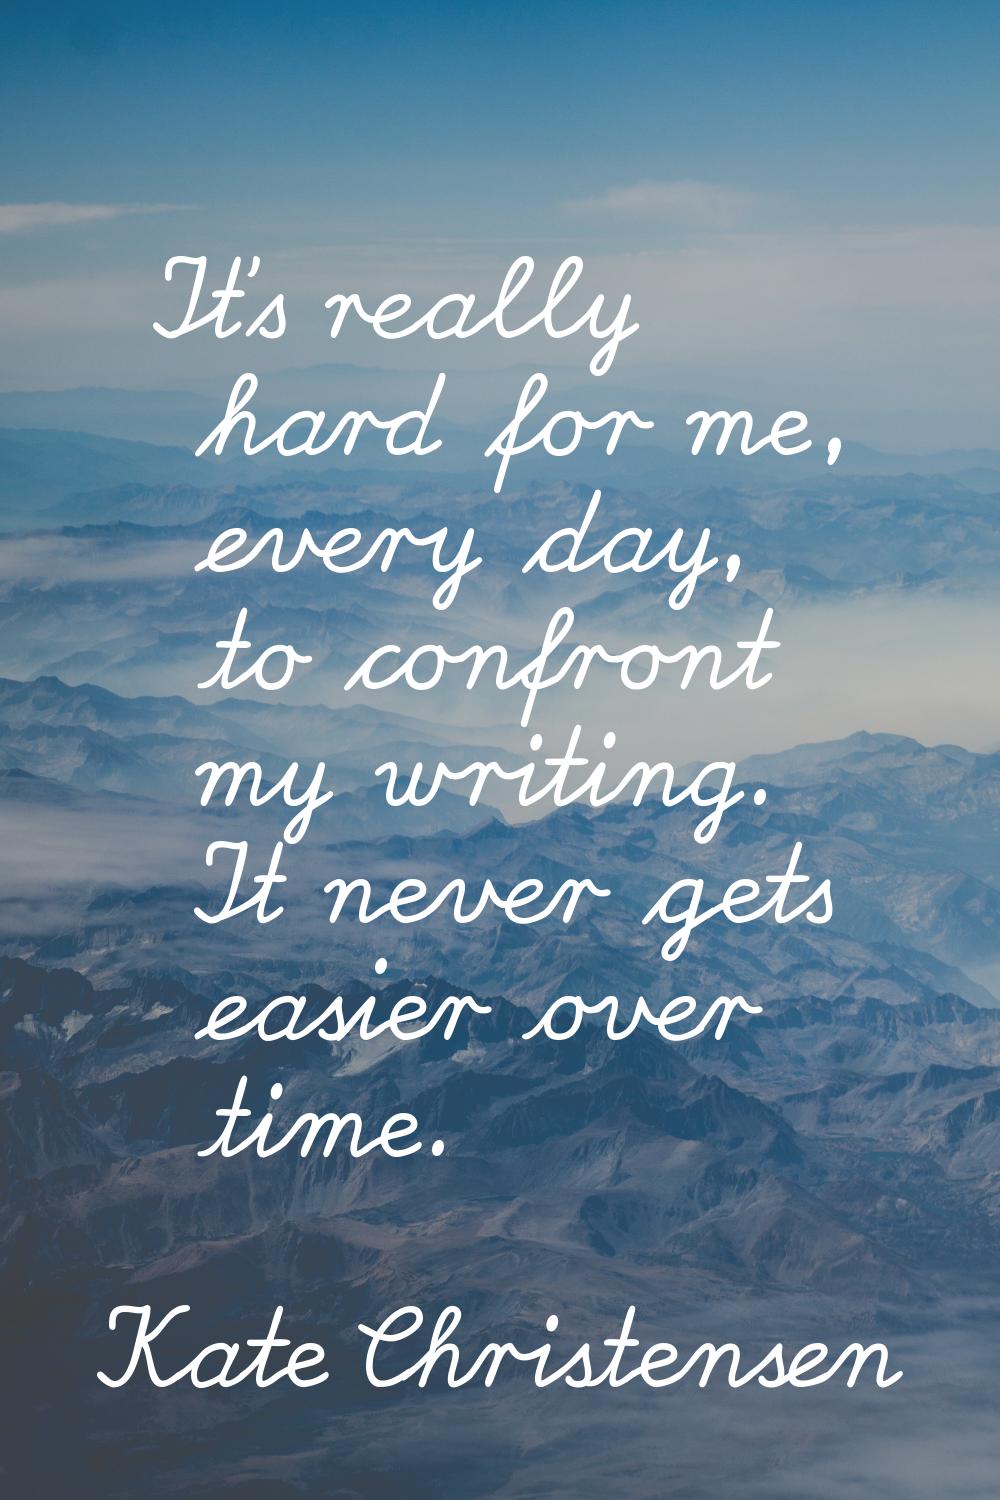 It's really hard for me, every day, to confront my writing. It never gets easier over time.